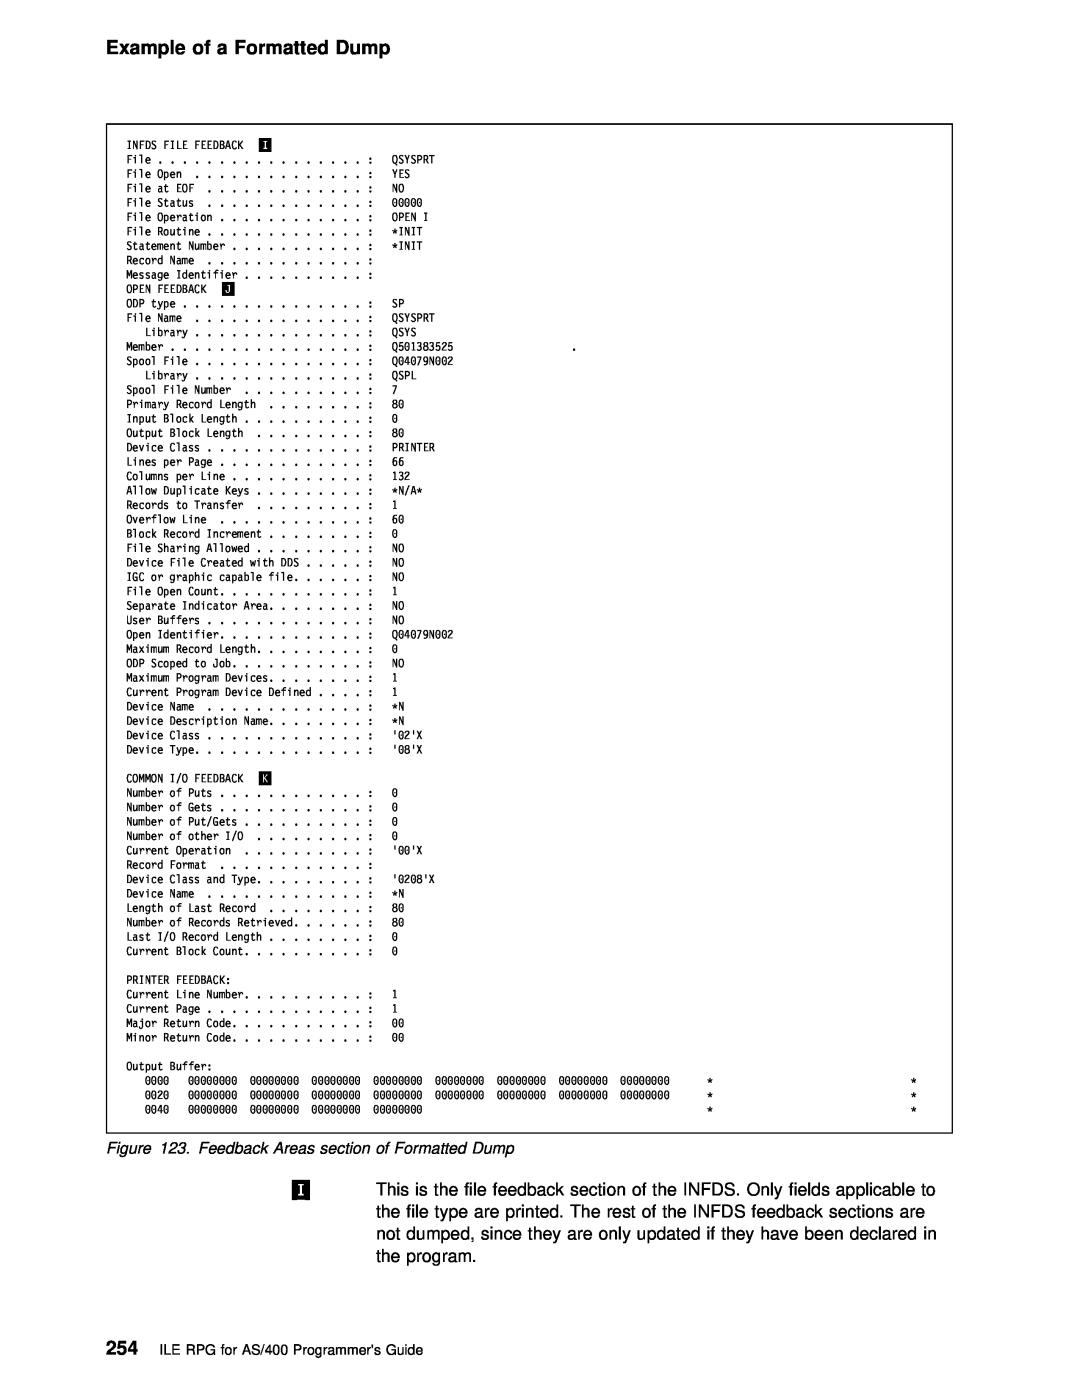 IBM AS/400 manual Example of a Formatted Dump, Feedback Areas section of Formatted Dump 